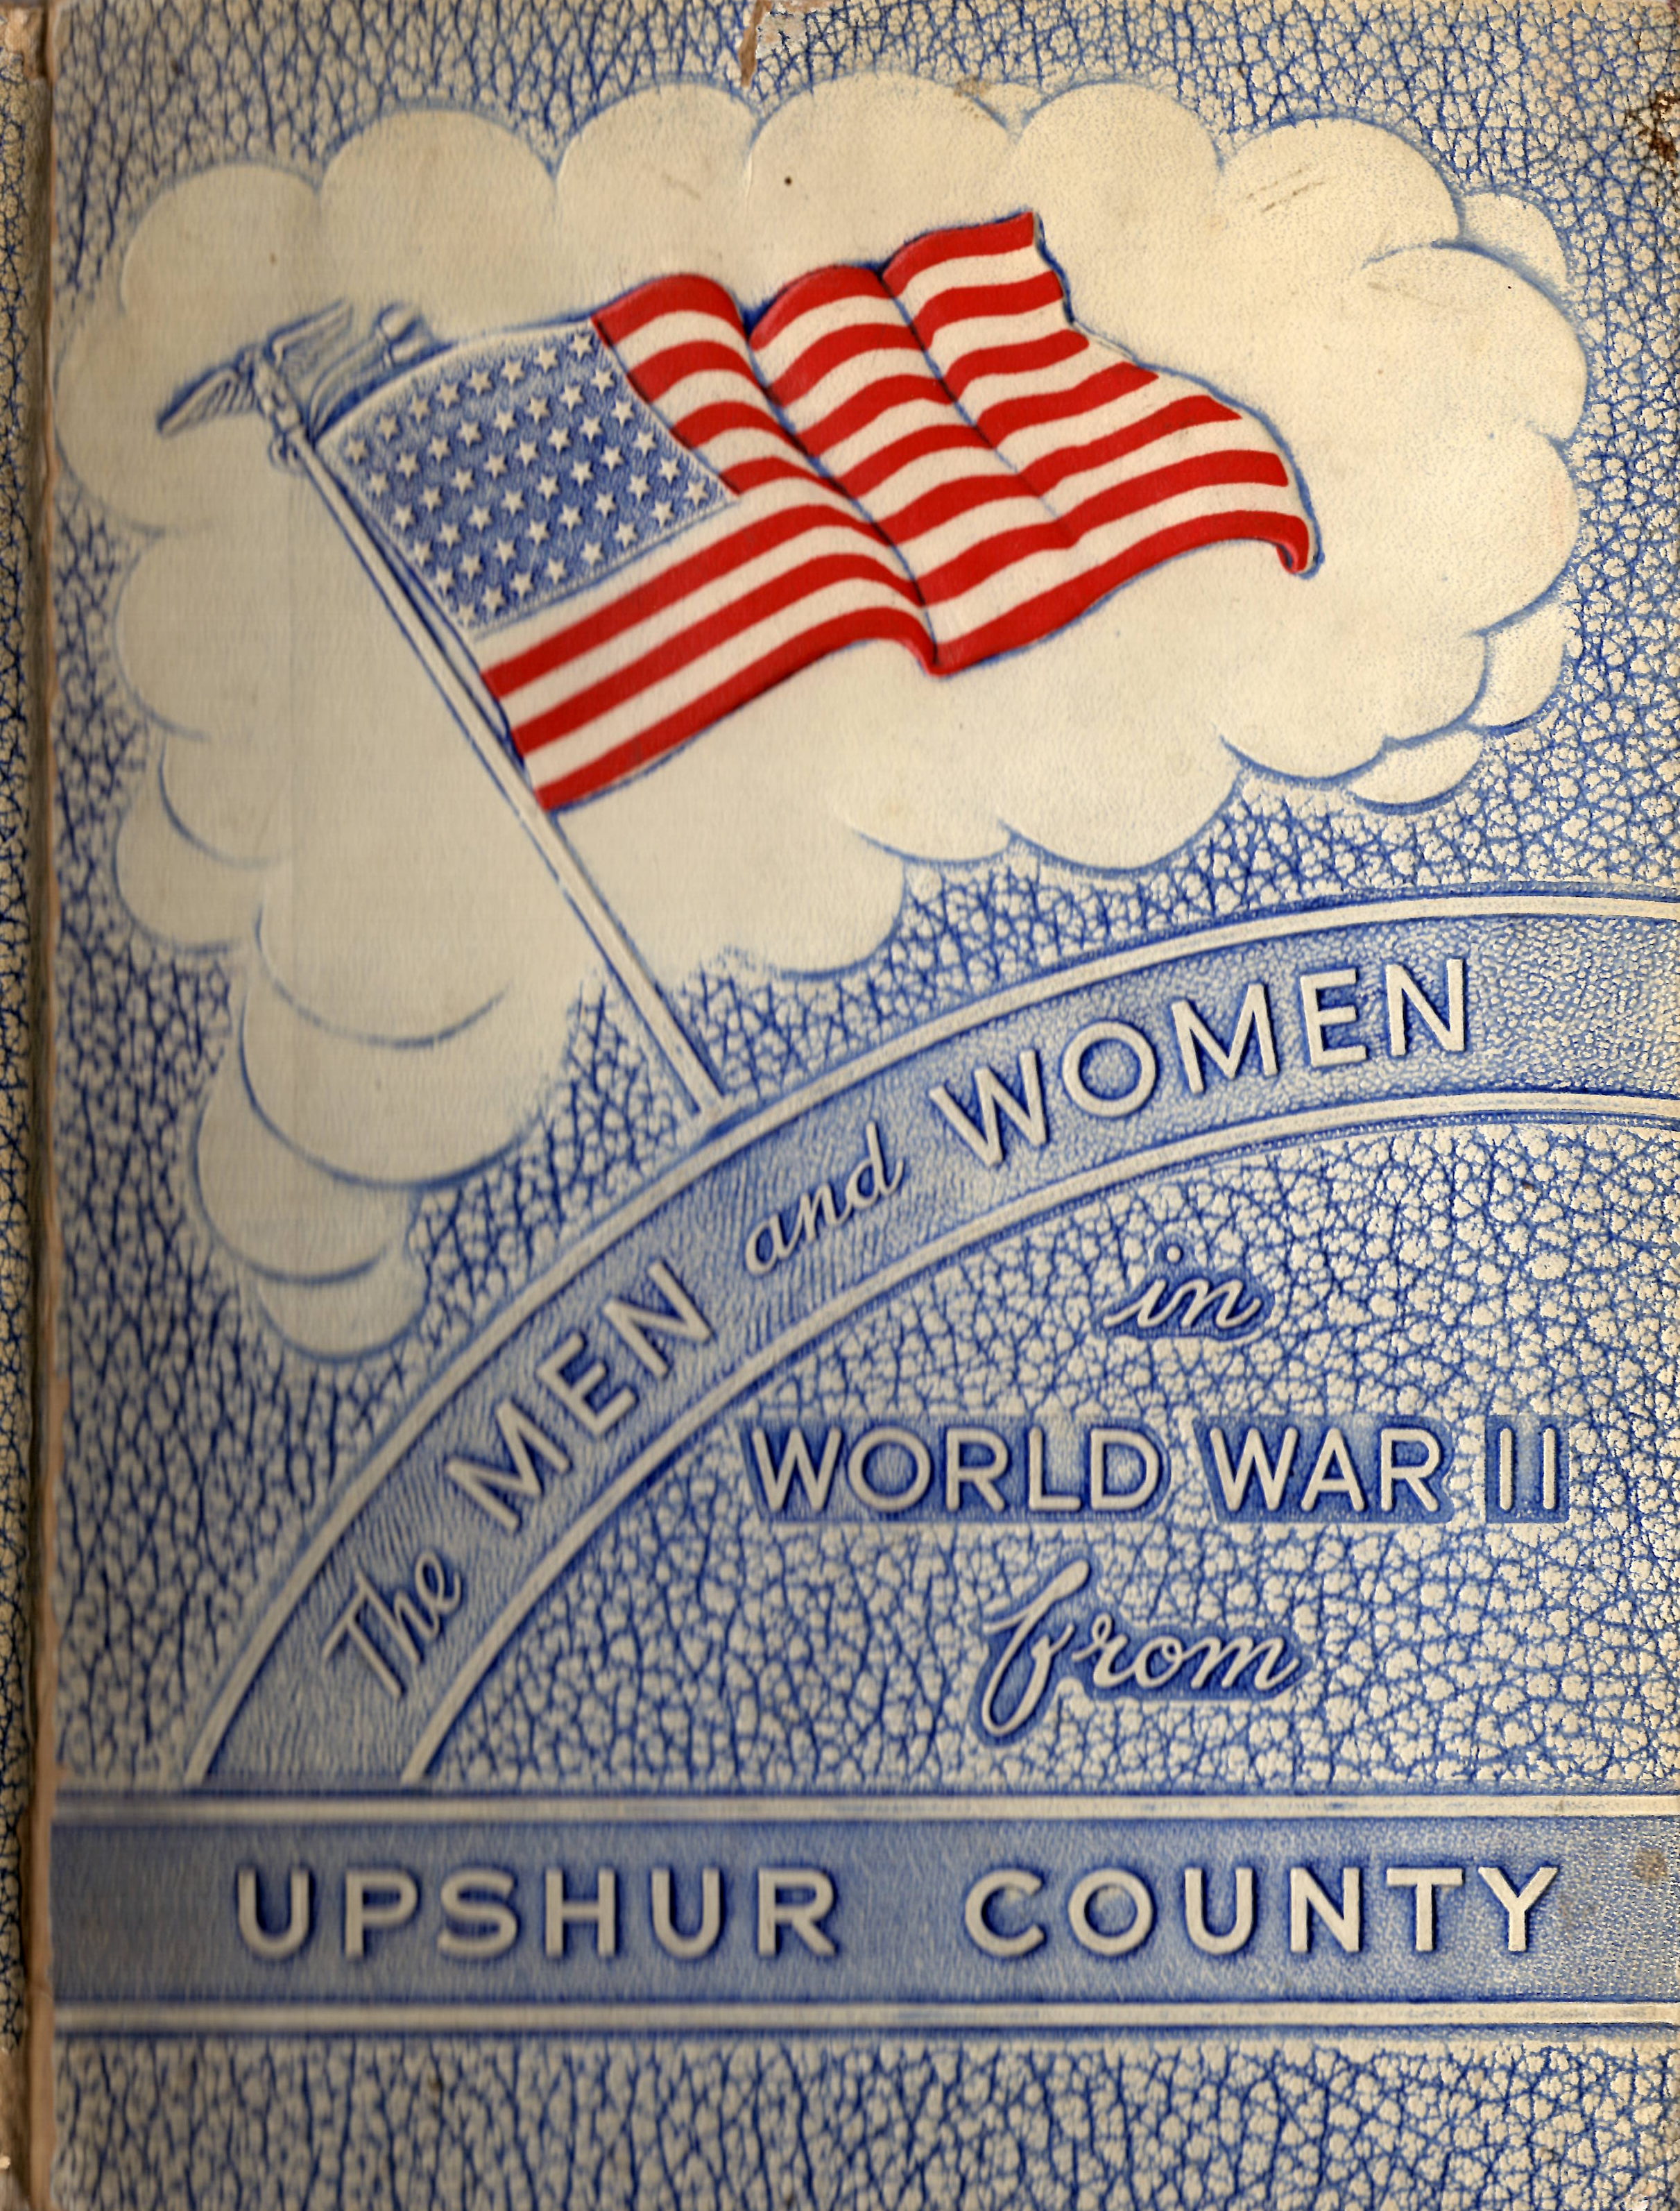 Men and women in the Armed Forces from Upshur County Texas